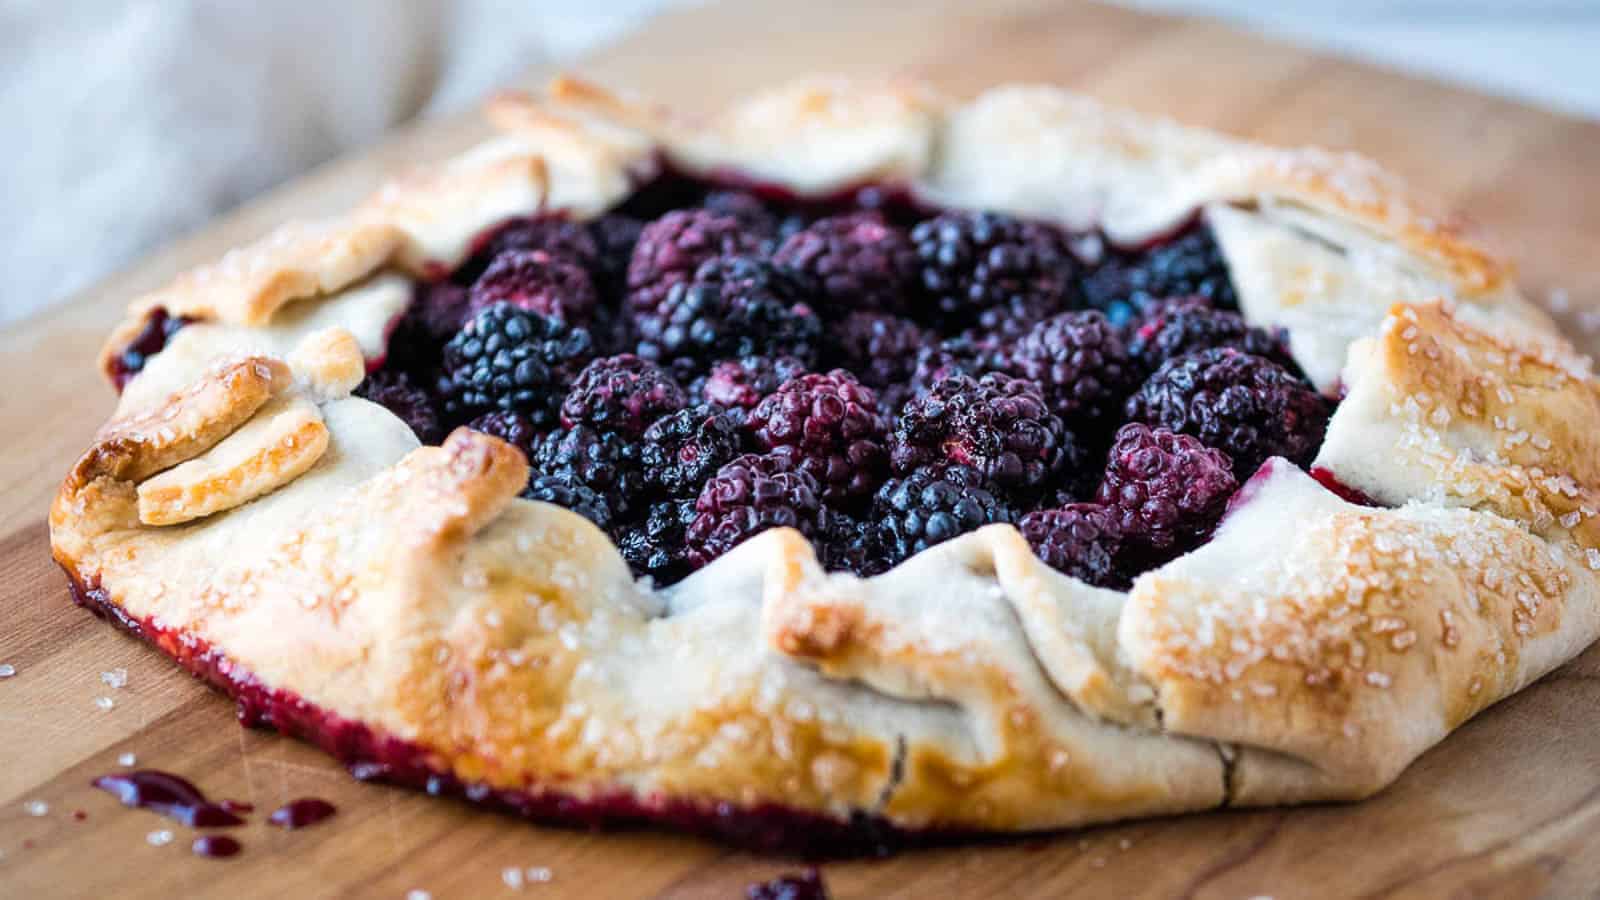 Blackberry galette topped with whipped cream.